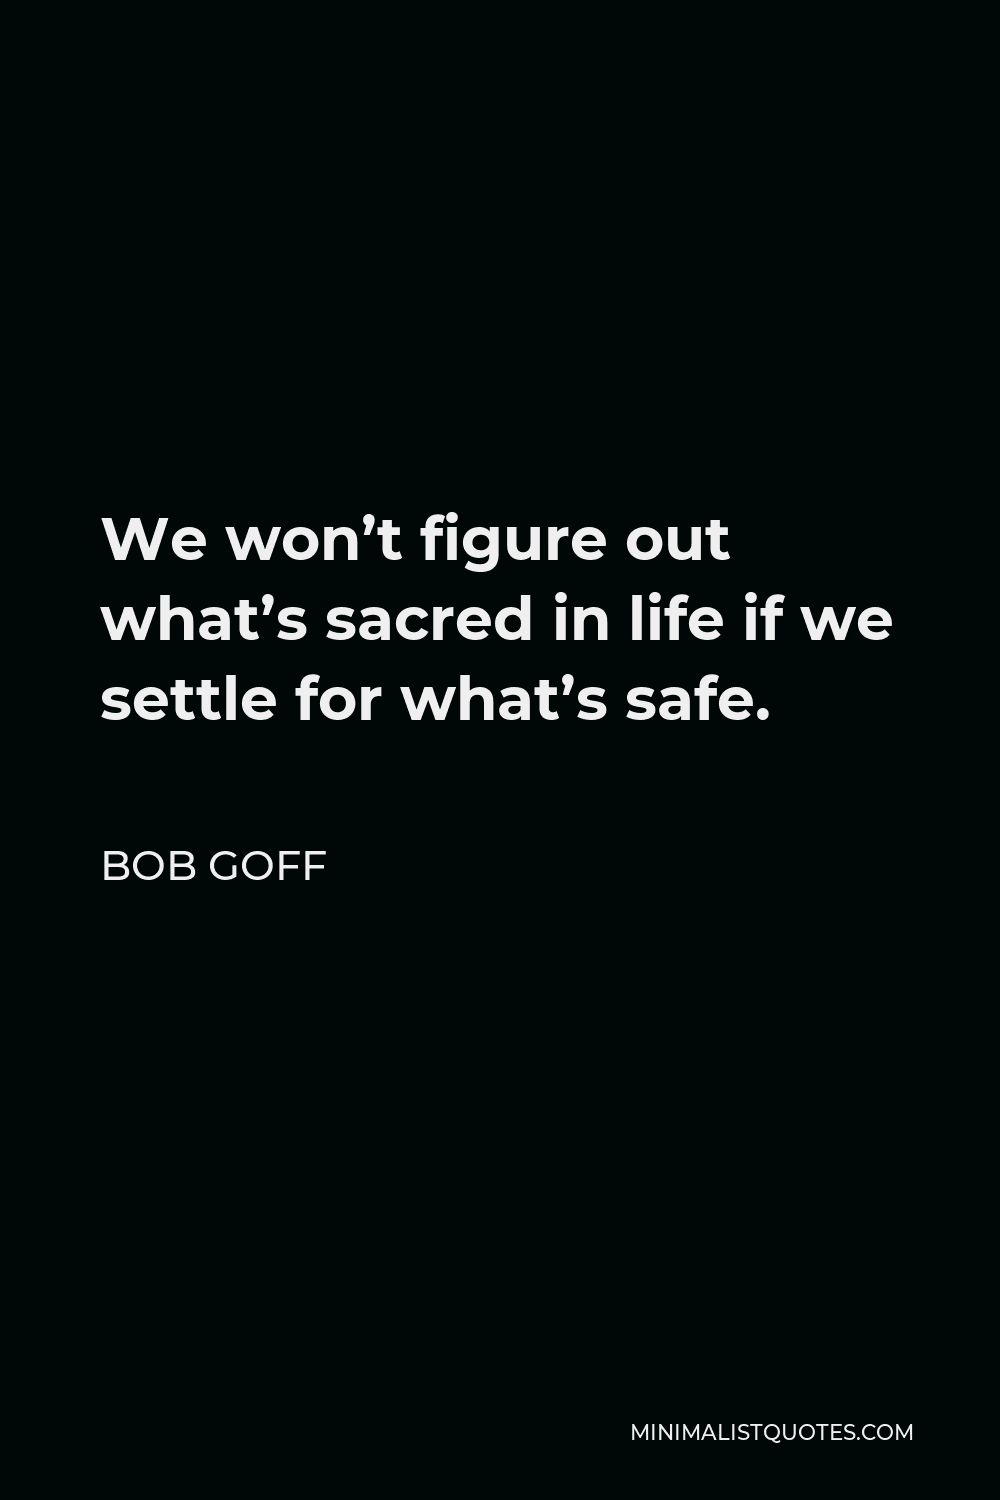 Bob Goff Quote - We won’t figure out what’s sacred in life if we settle for what’s safe.